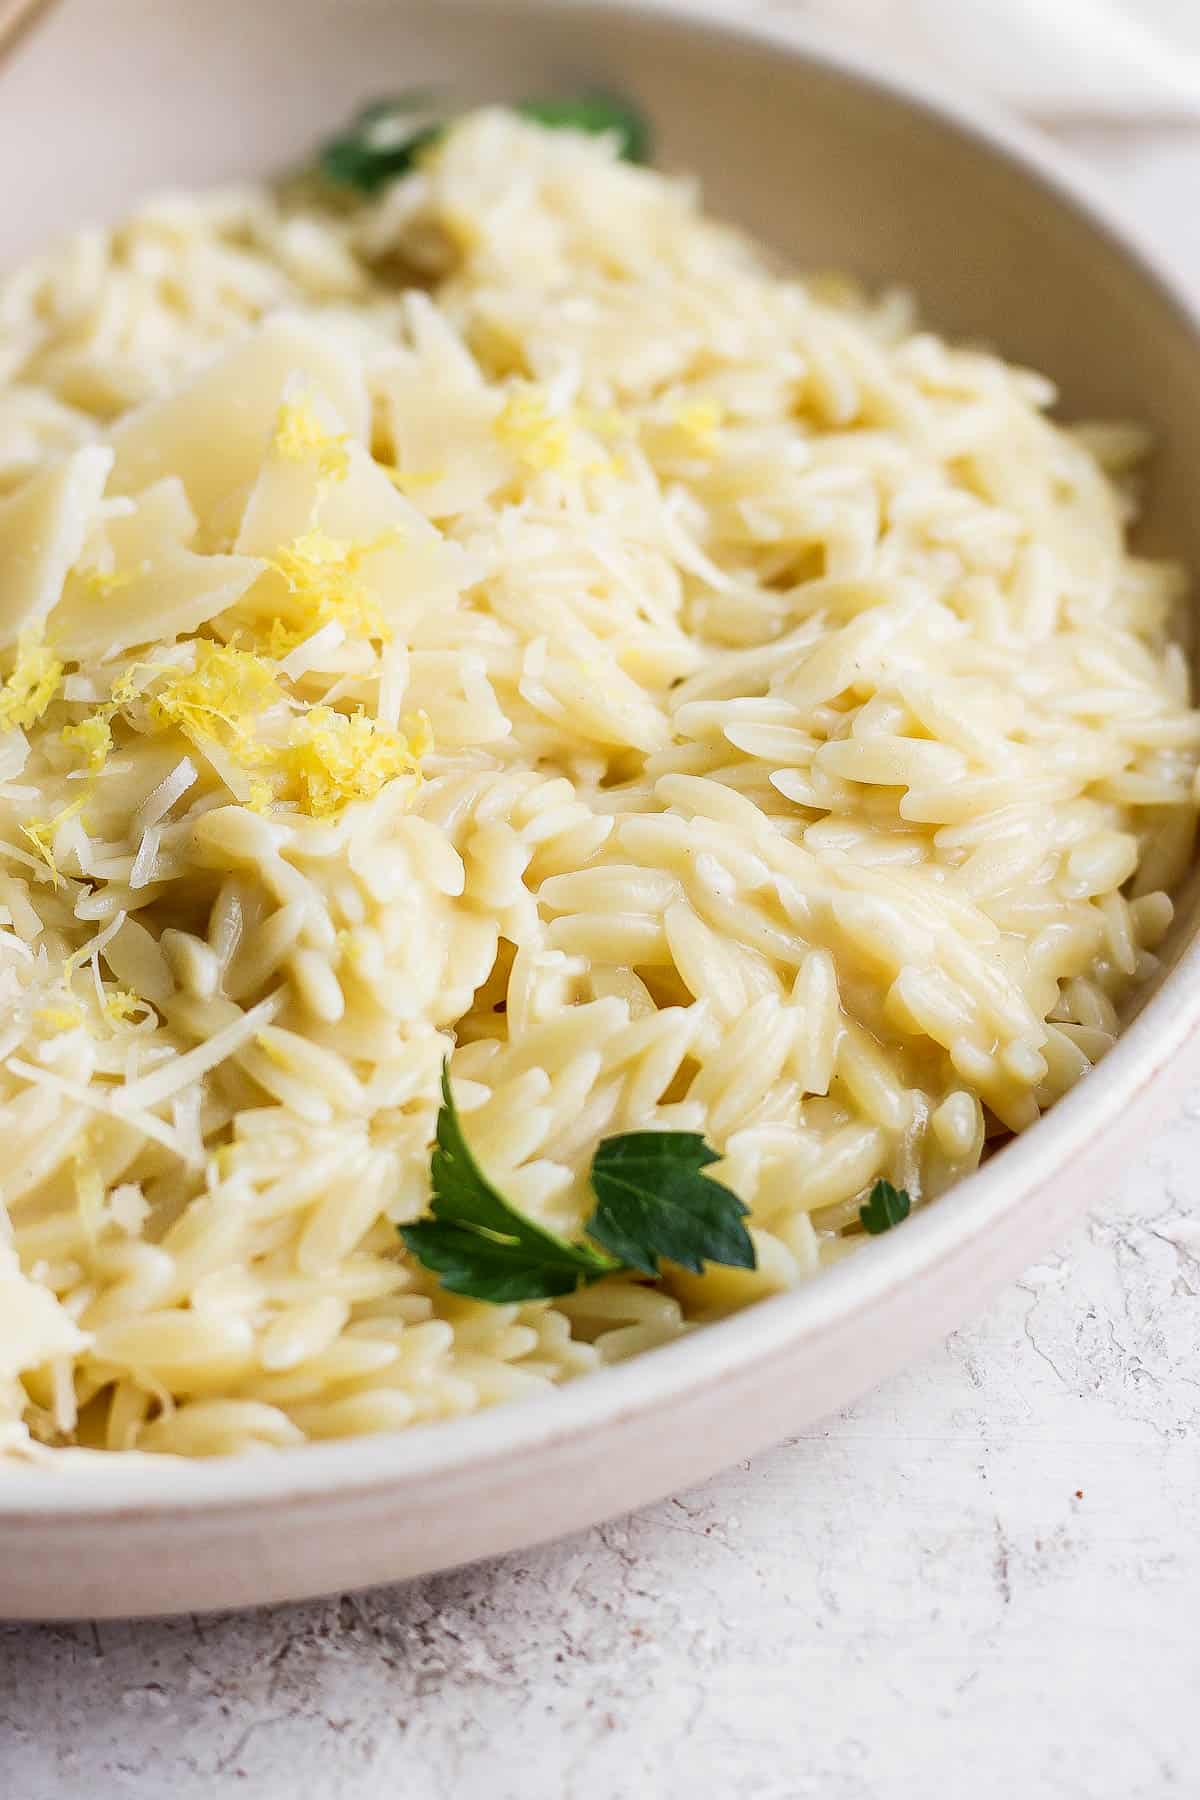 Parmesan orzo in a bowl garnished with lemon zest and parsley.